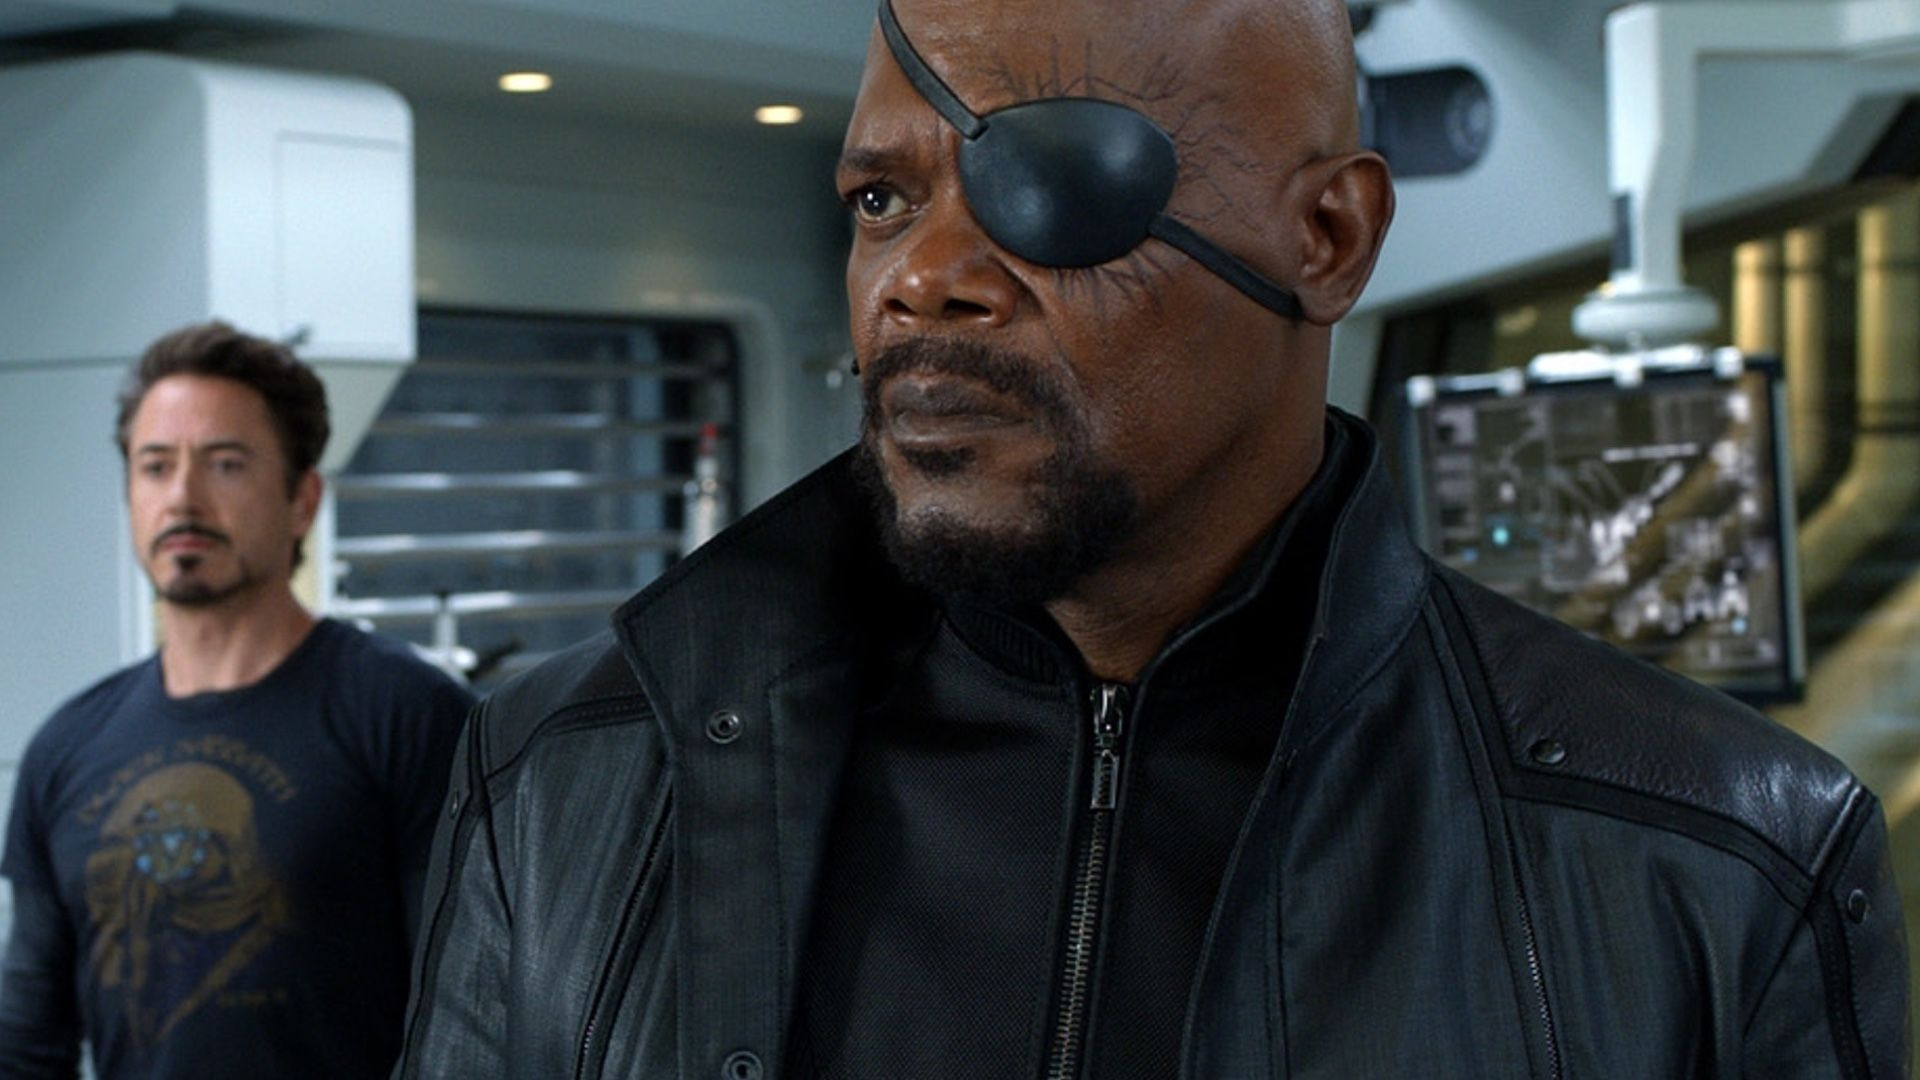 Film fans ponder which movies would be improved by Nick Fury showing up in a post-credits scene